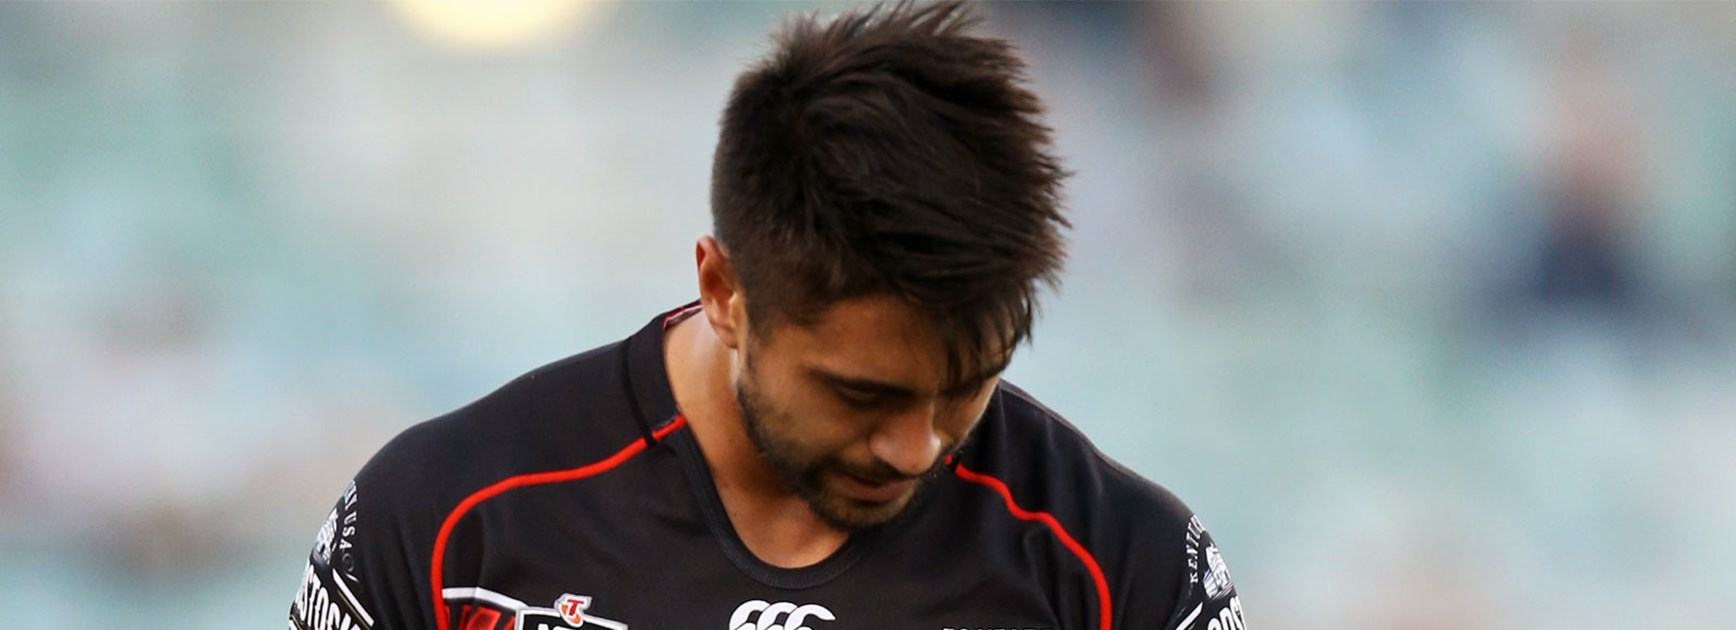 Shaun Johnson has been struggling in NRL Fantasy this season, but is more than capable of turning things around.